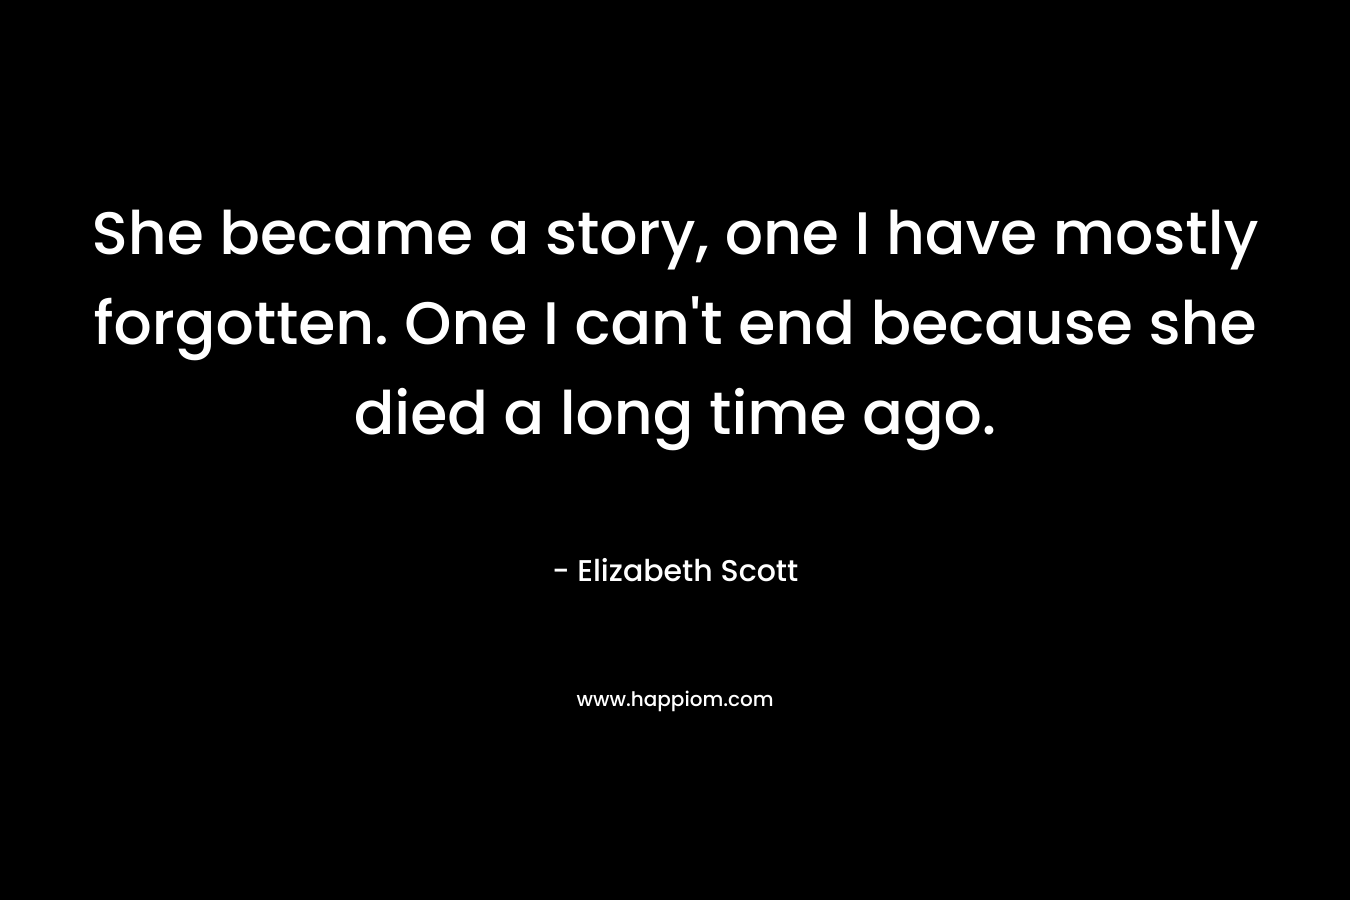 She became a story, one I have mostly forgotten. One I can't end because she died a long time ago.